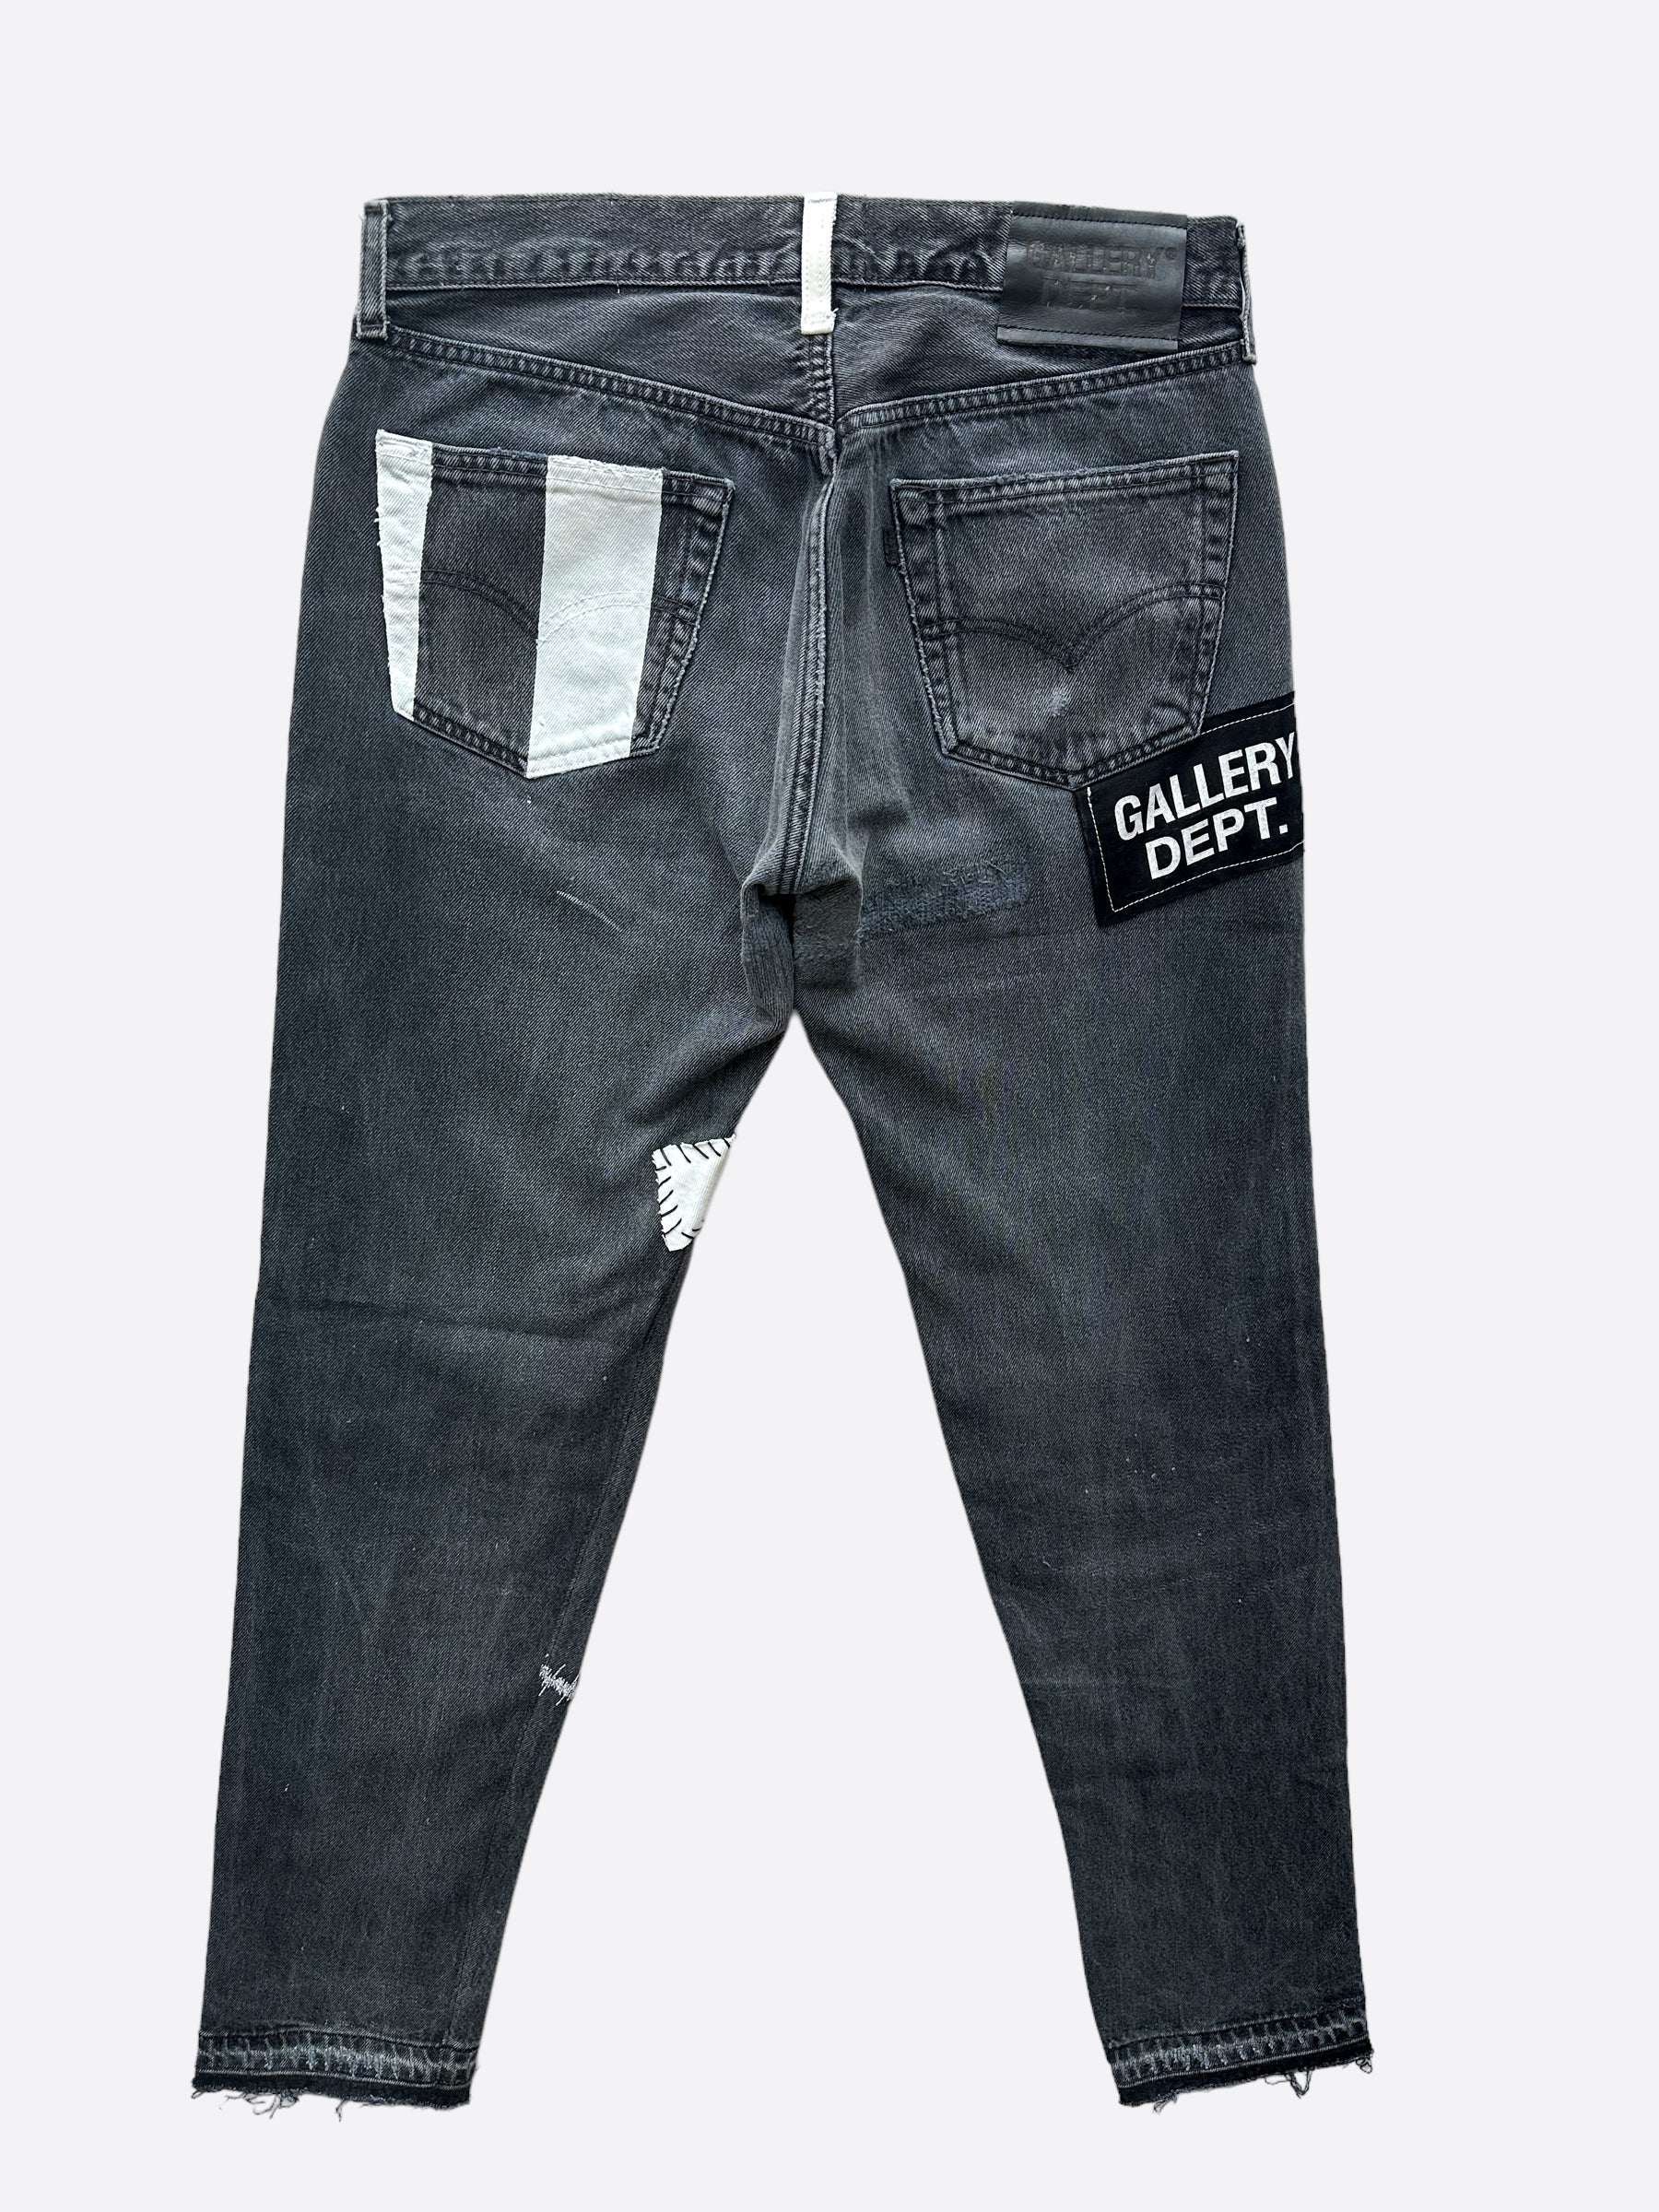 Gallery Dept Black Fuck Face Distressed Jeans